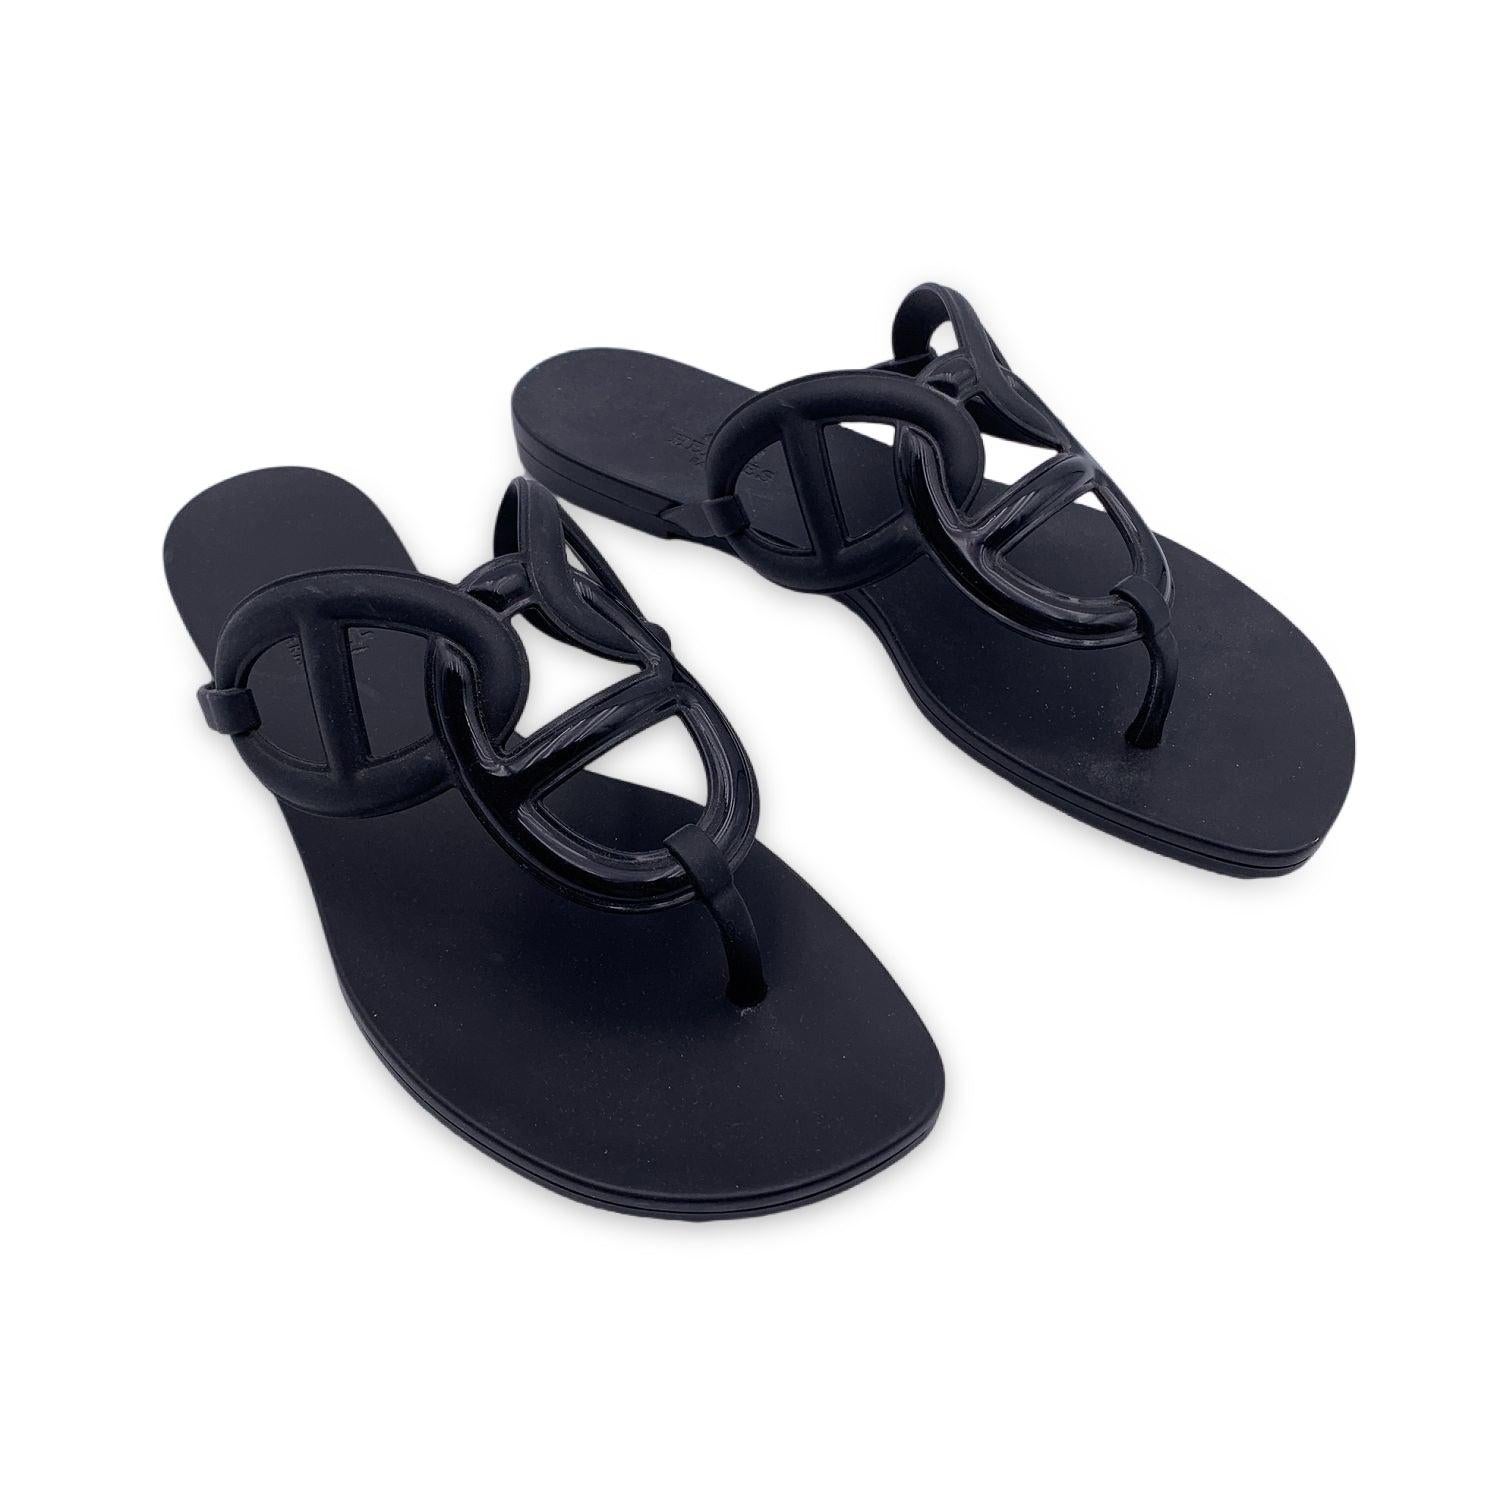 Hermès 'Egerie' sandal in waterproof rubber with Chaine d'Ancre motif. Size 36. Foot lenght: 9 inches - 23 cm Details MATERIAL: Leather COLOR: Black MODEL: Egerie GENDER: Women COUNTRY OF MANUFACTURE: Italy STYLE: Flip Flop PATTERN: Solid SEASON: